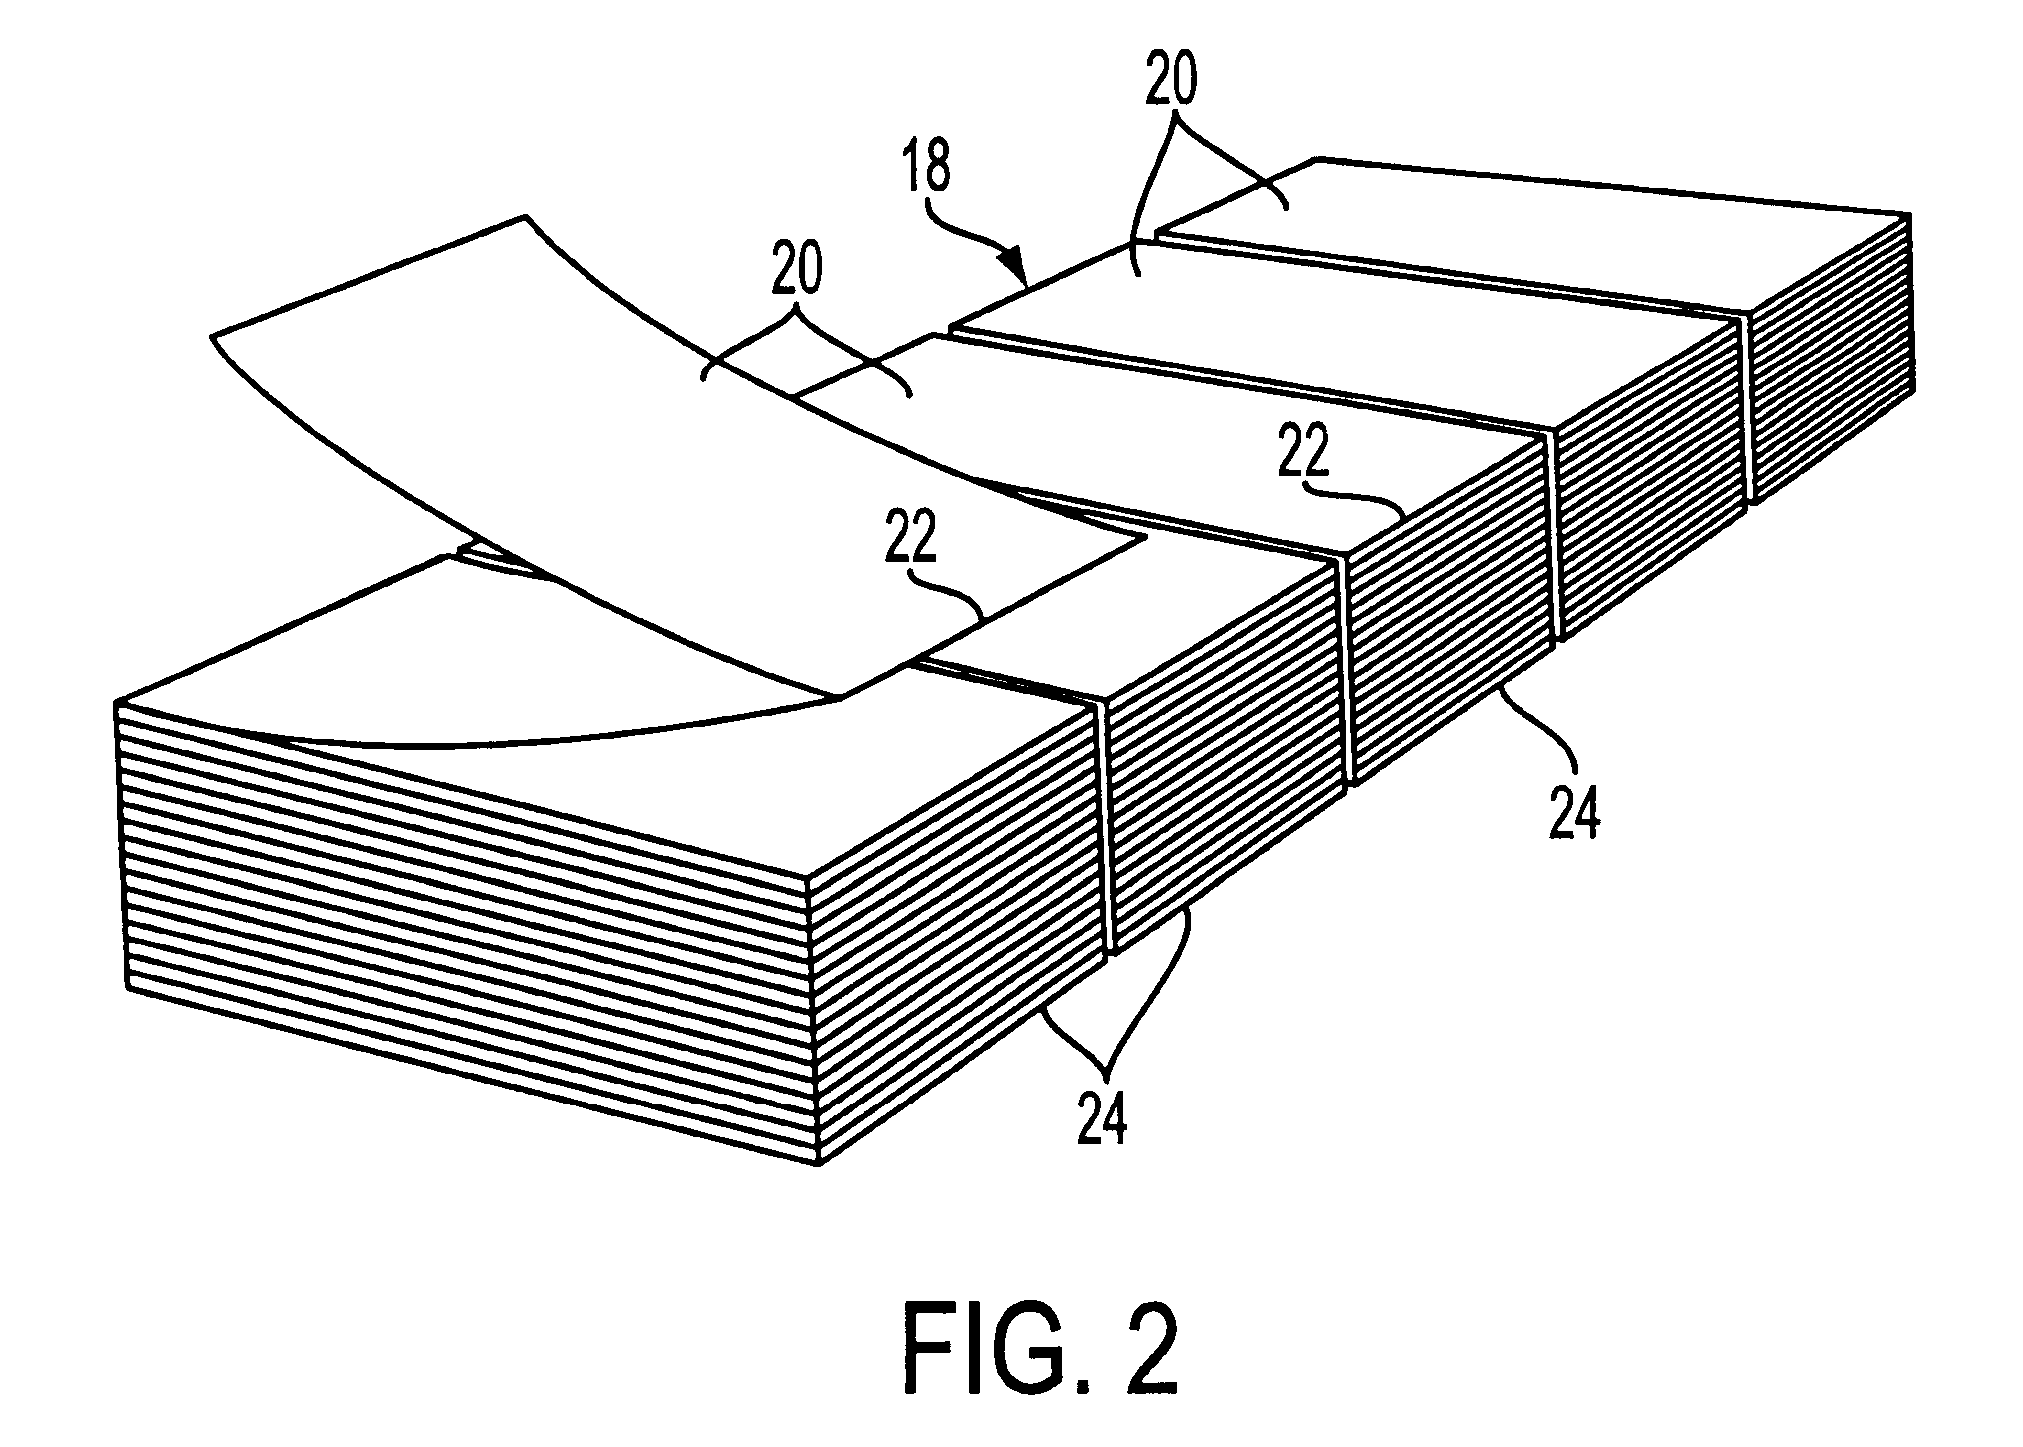 Apparatus for cutting and stacking a multi-form web